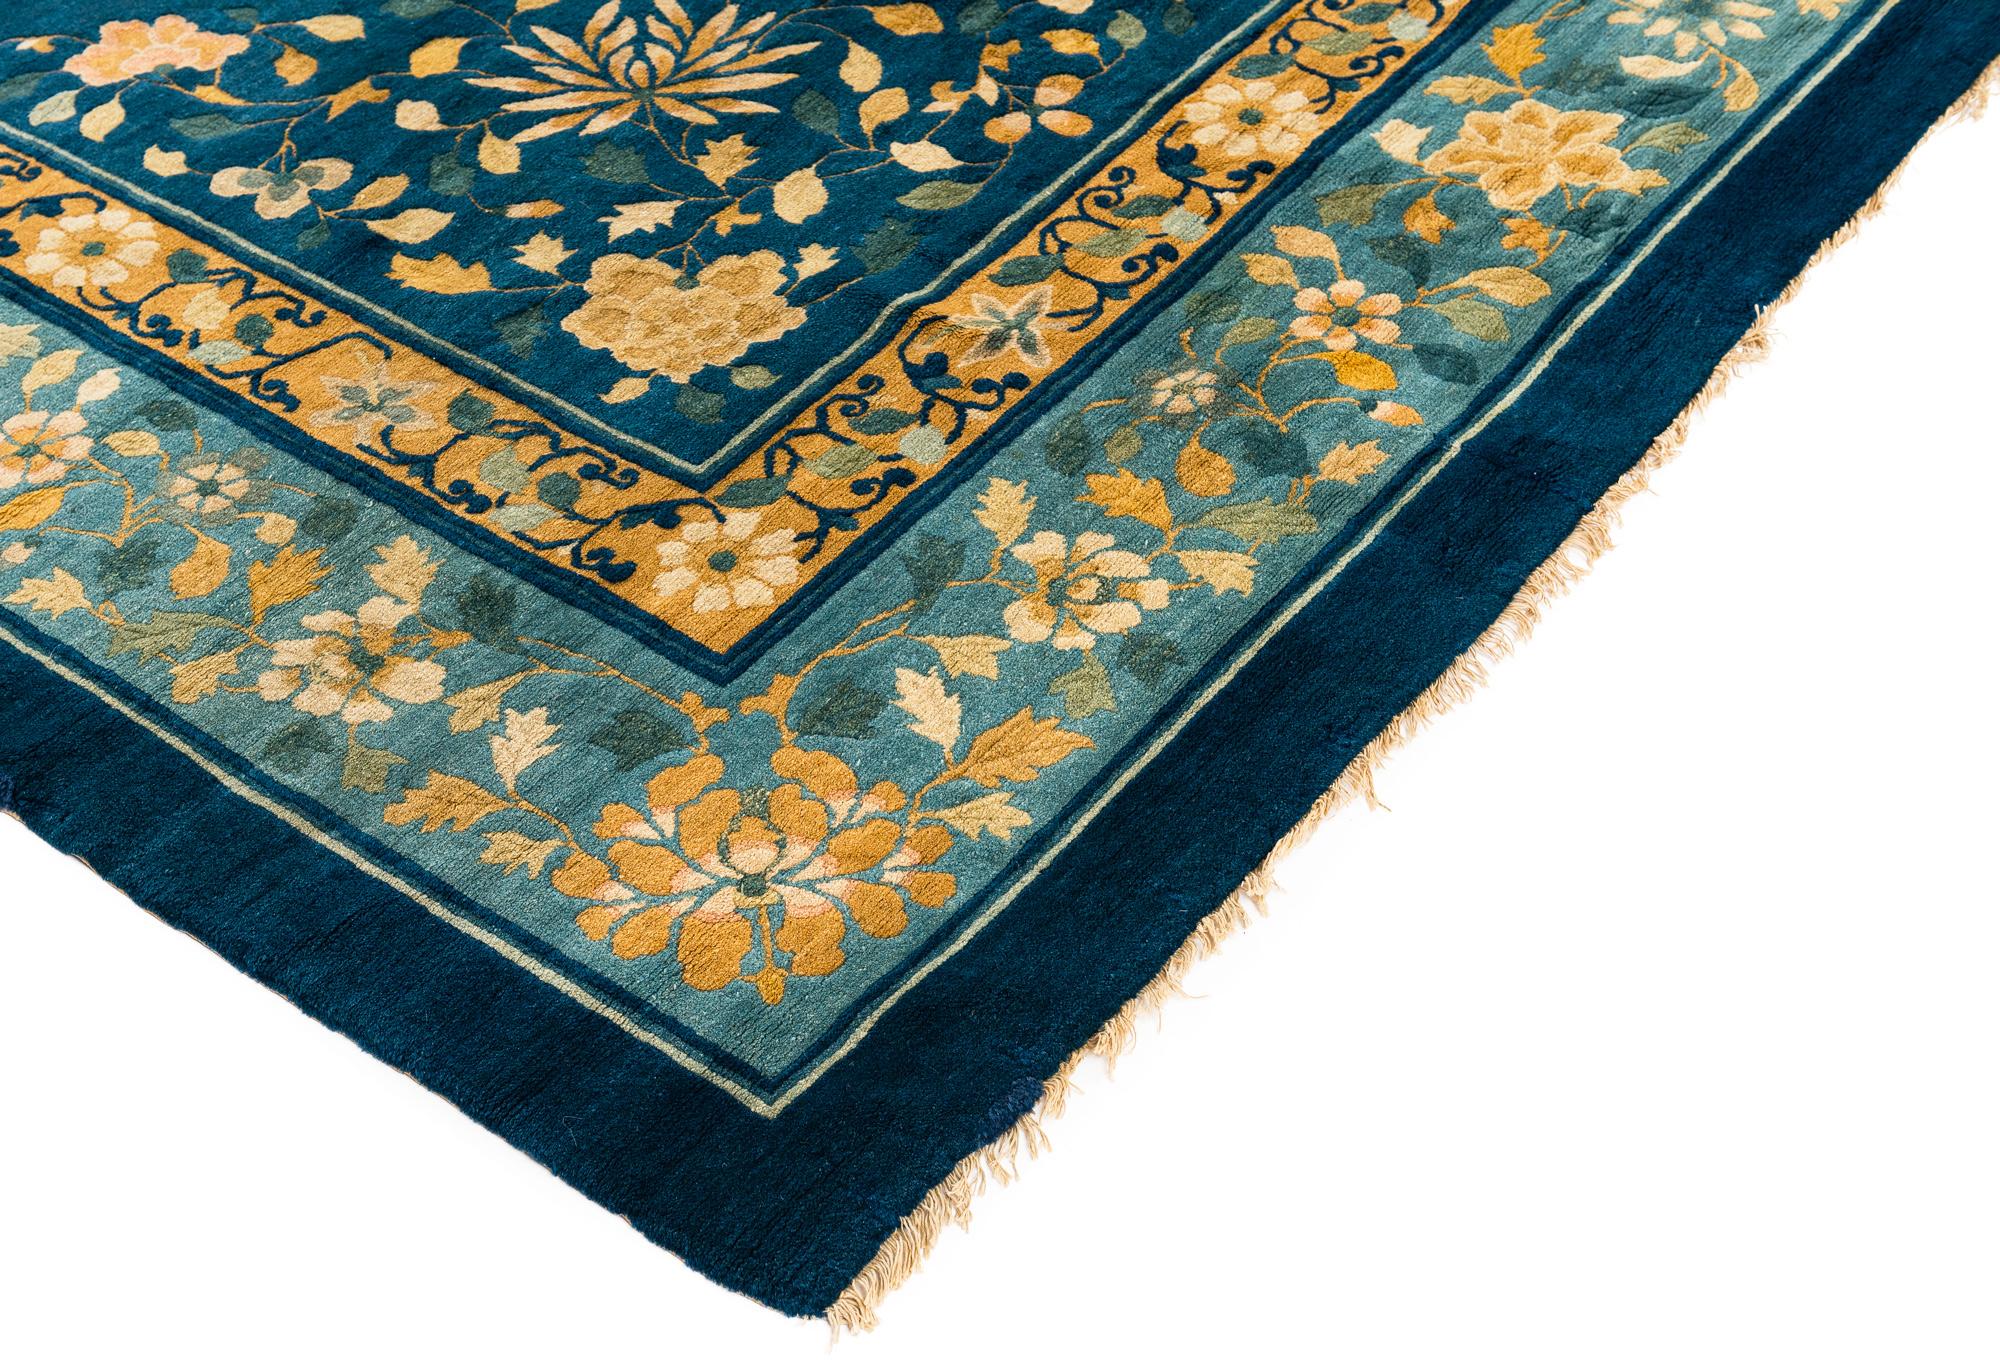 Hand-Knotted Antique Blue and Yellow Chinese Rug with Floral Decor Design 19th Century For Sale